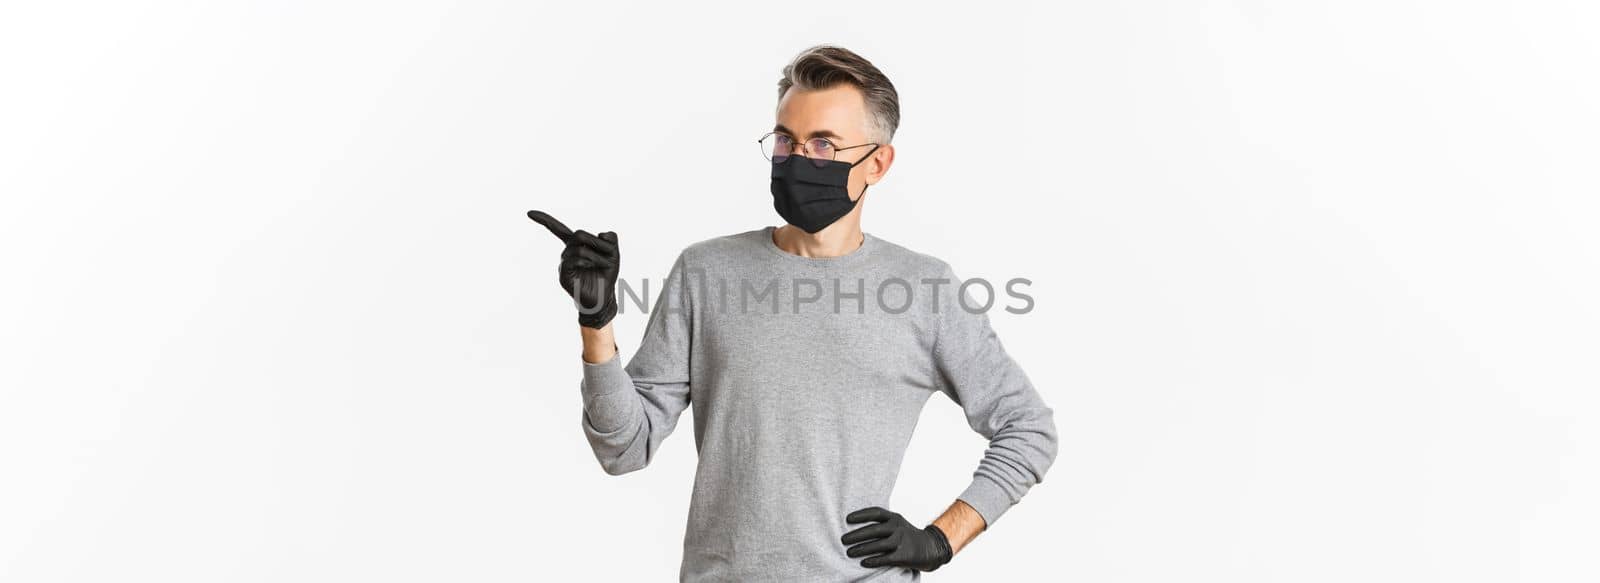 Concept of coronavirus, lifestyle and quarantine. Intrigued middle-aged man in medical mask, gloves and glasses pointing finger right and looking at advertisement, standing over white background.